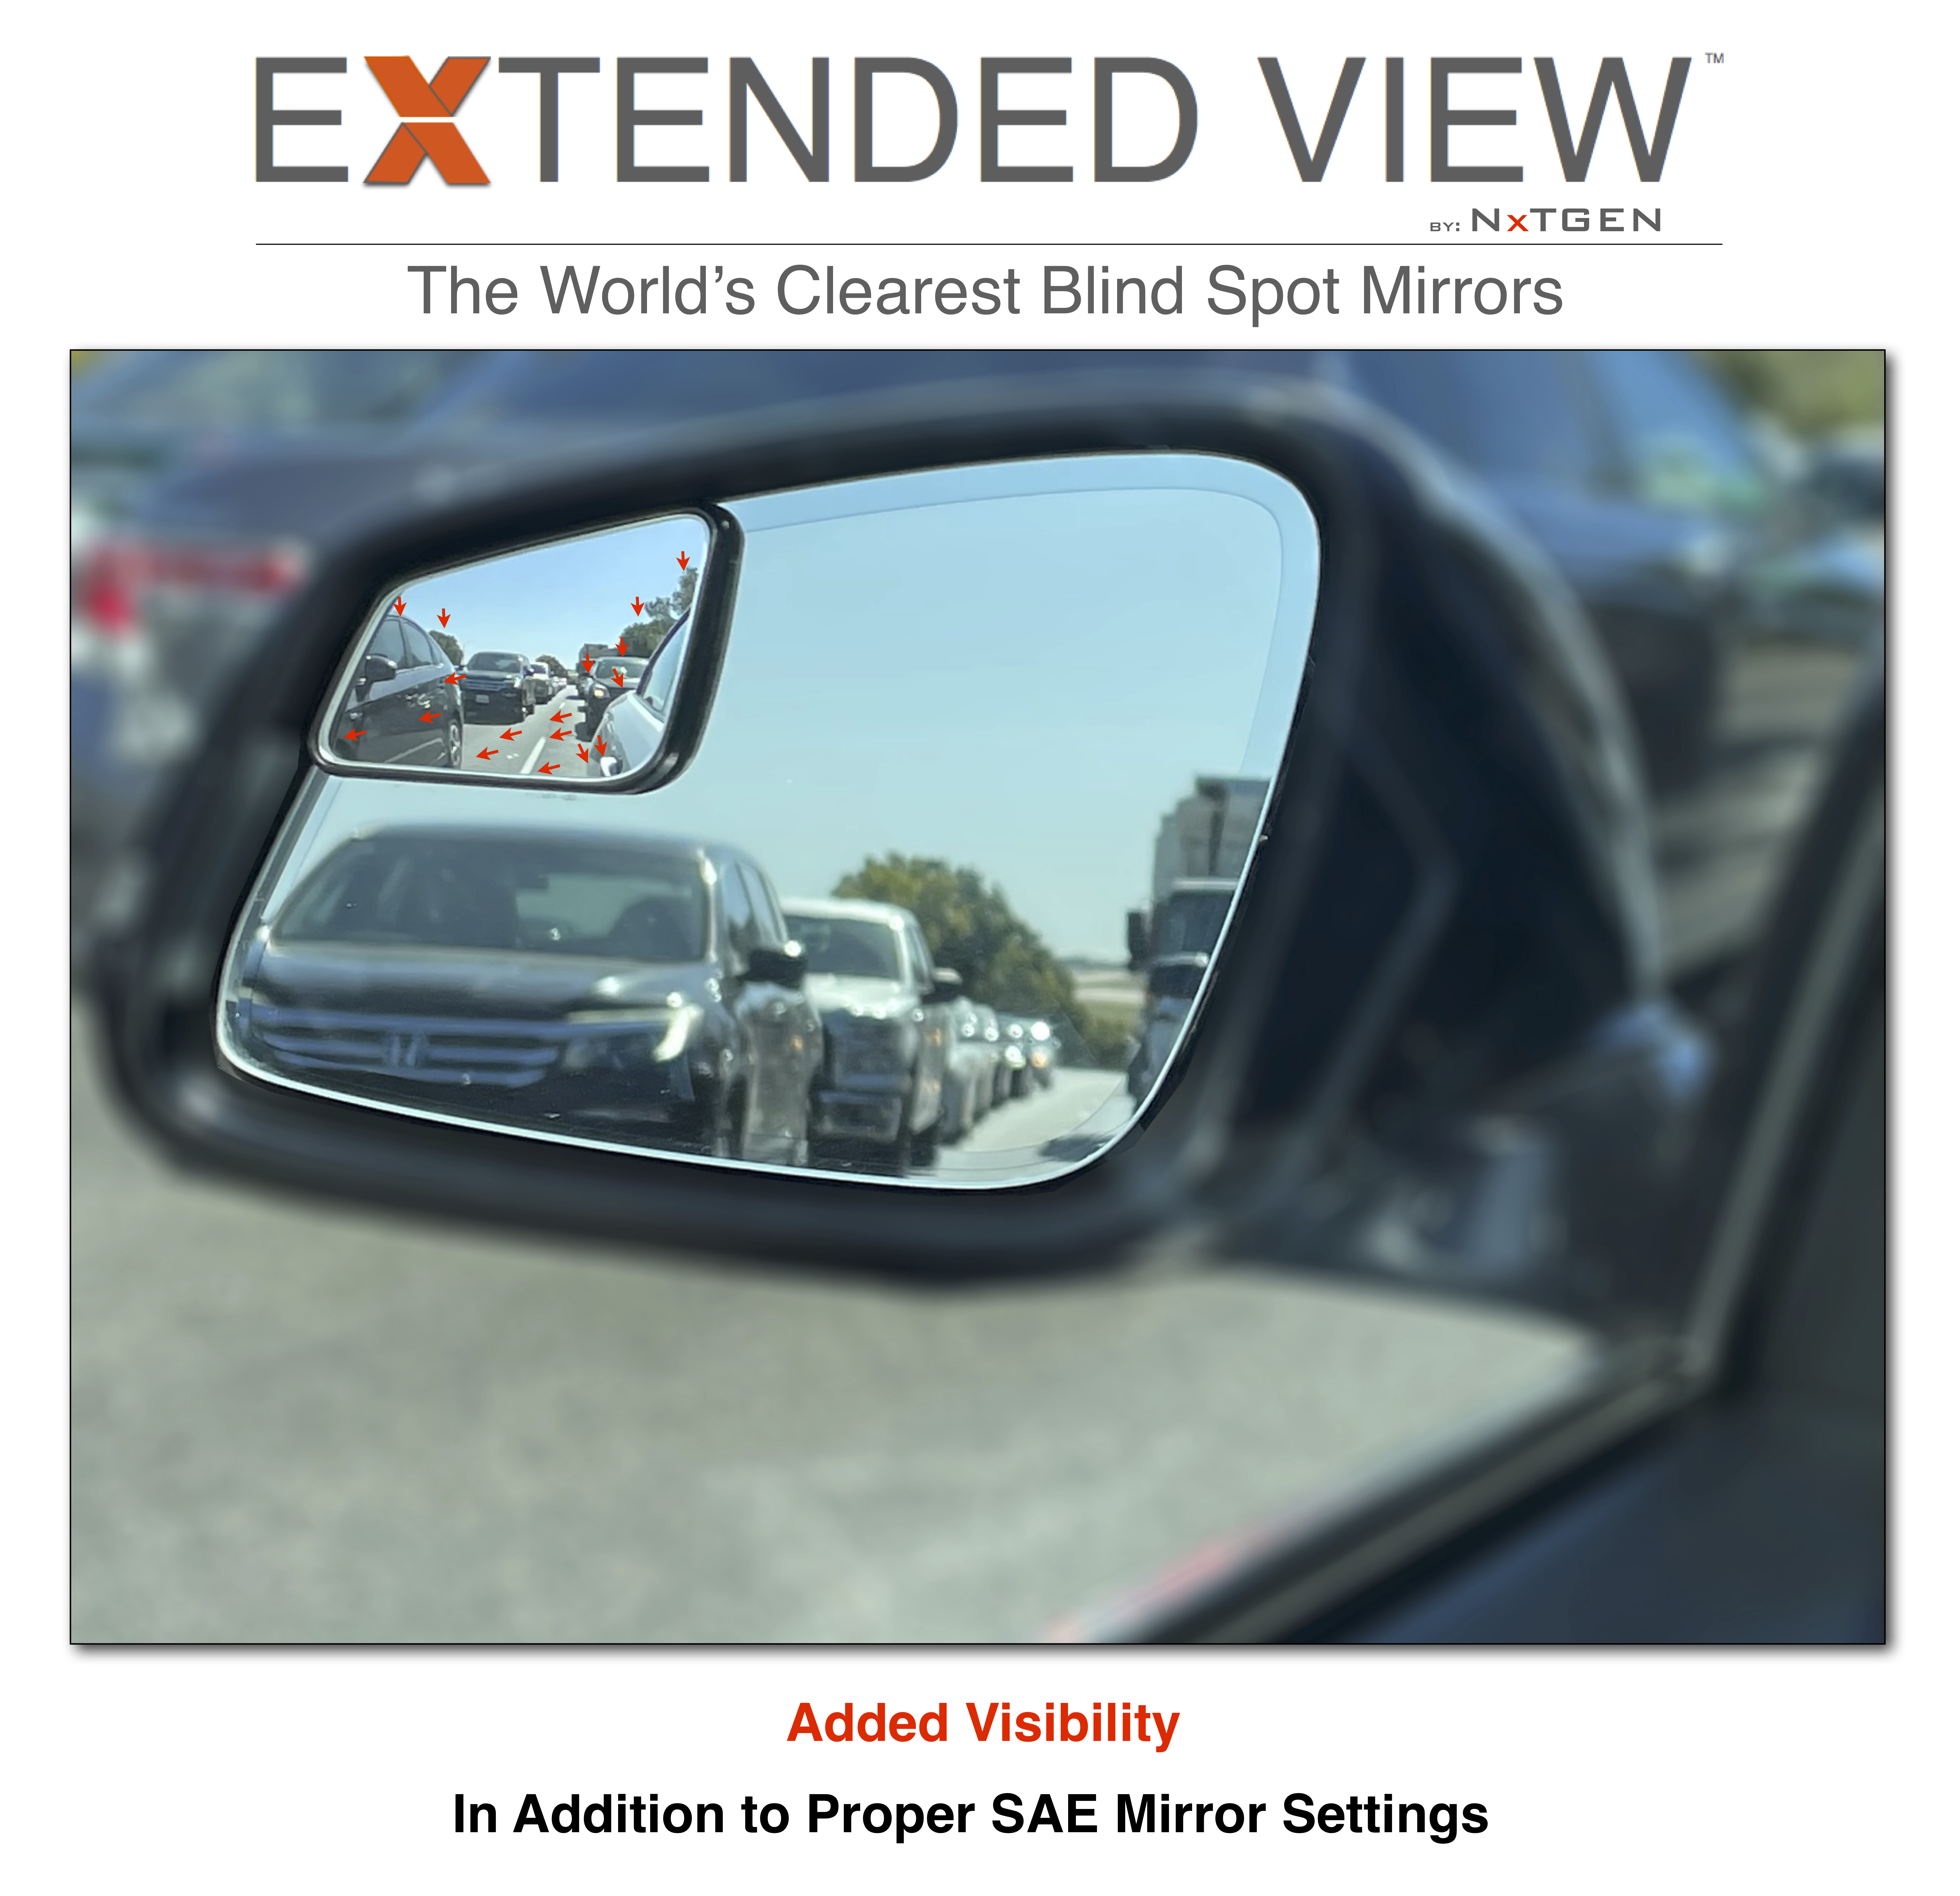 BMW M2 Blind Spot Mirrors | F87 Extended View™